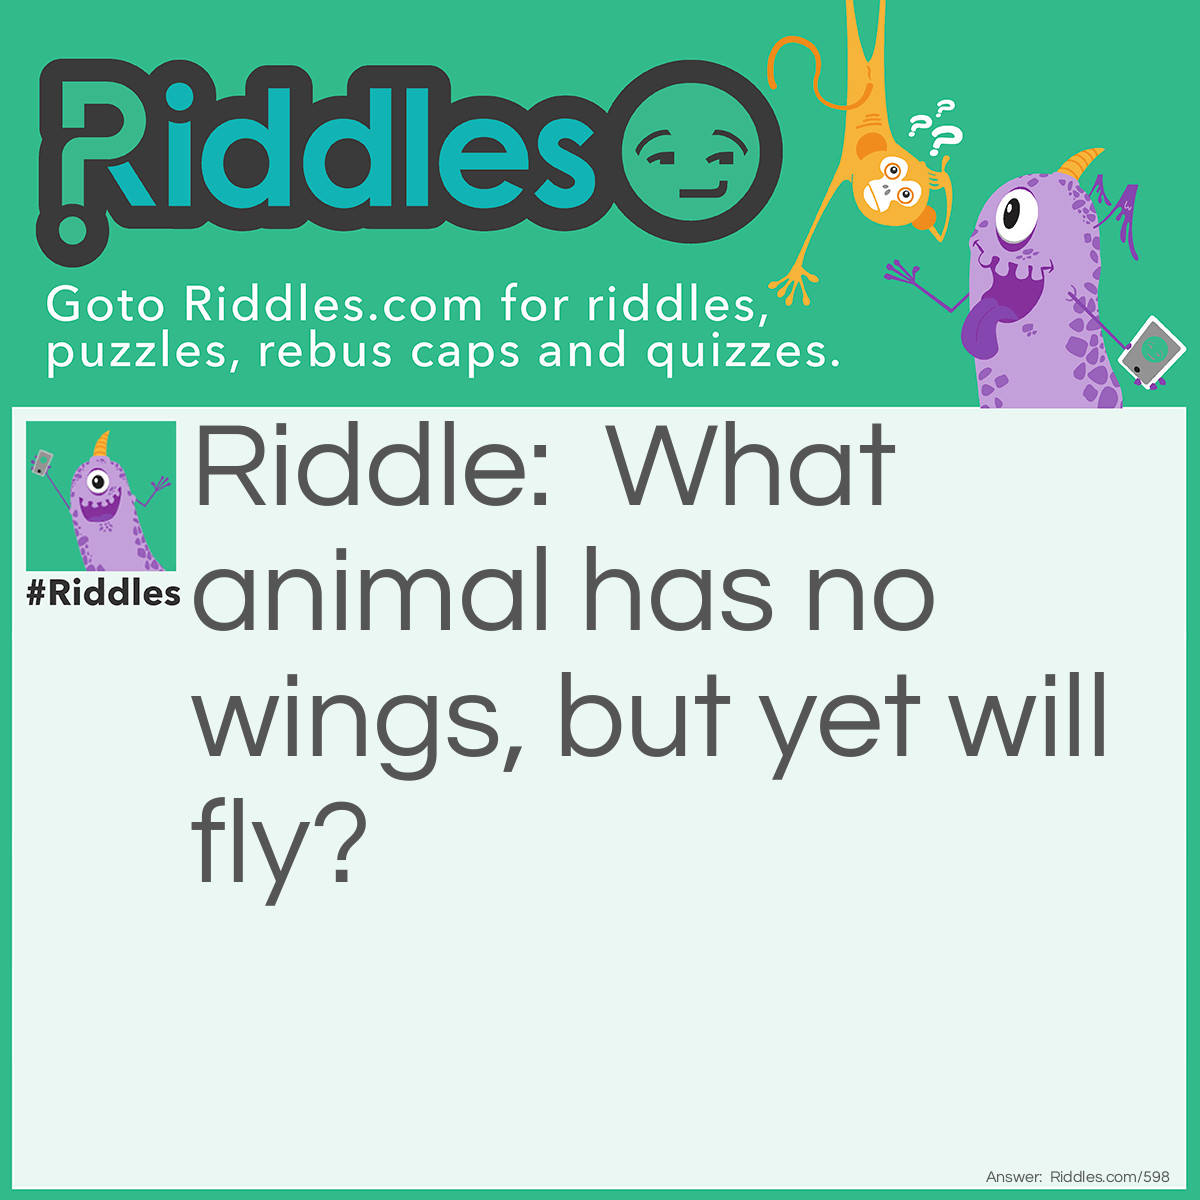 Riddle: What animal has no wings, but yet will fly? Answer: A caterpillar has no wings, but will fly when it matures and becomes a butterfly.